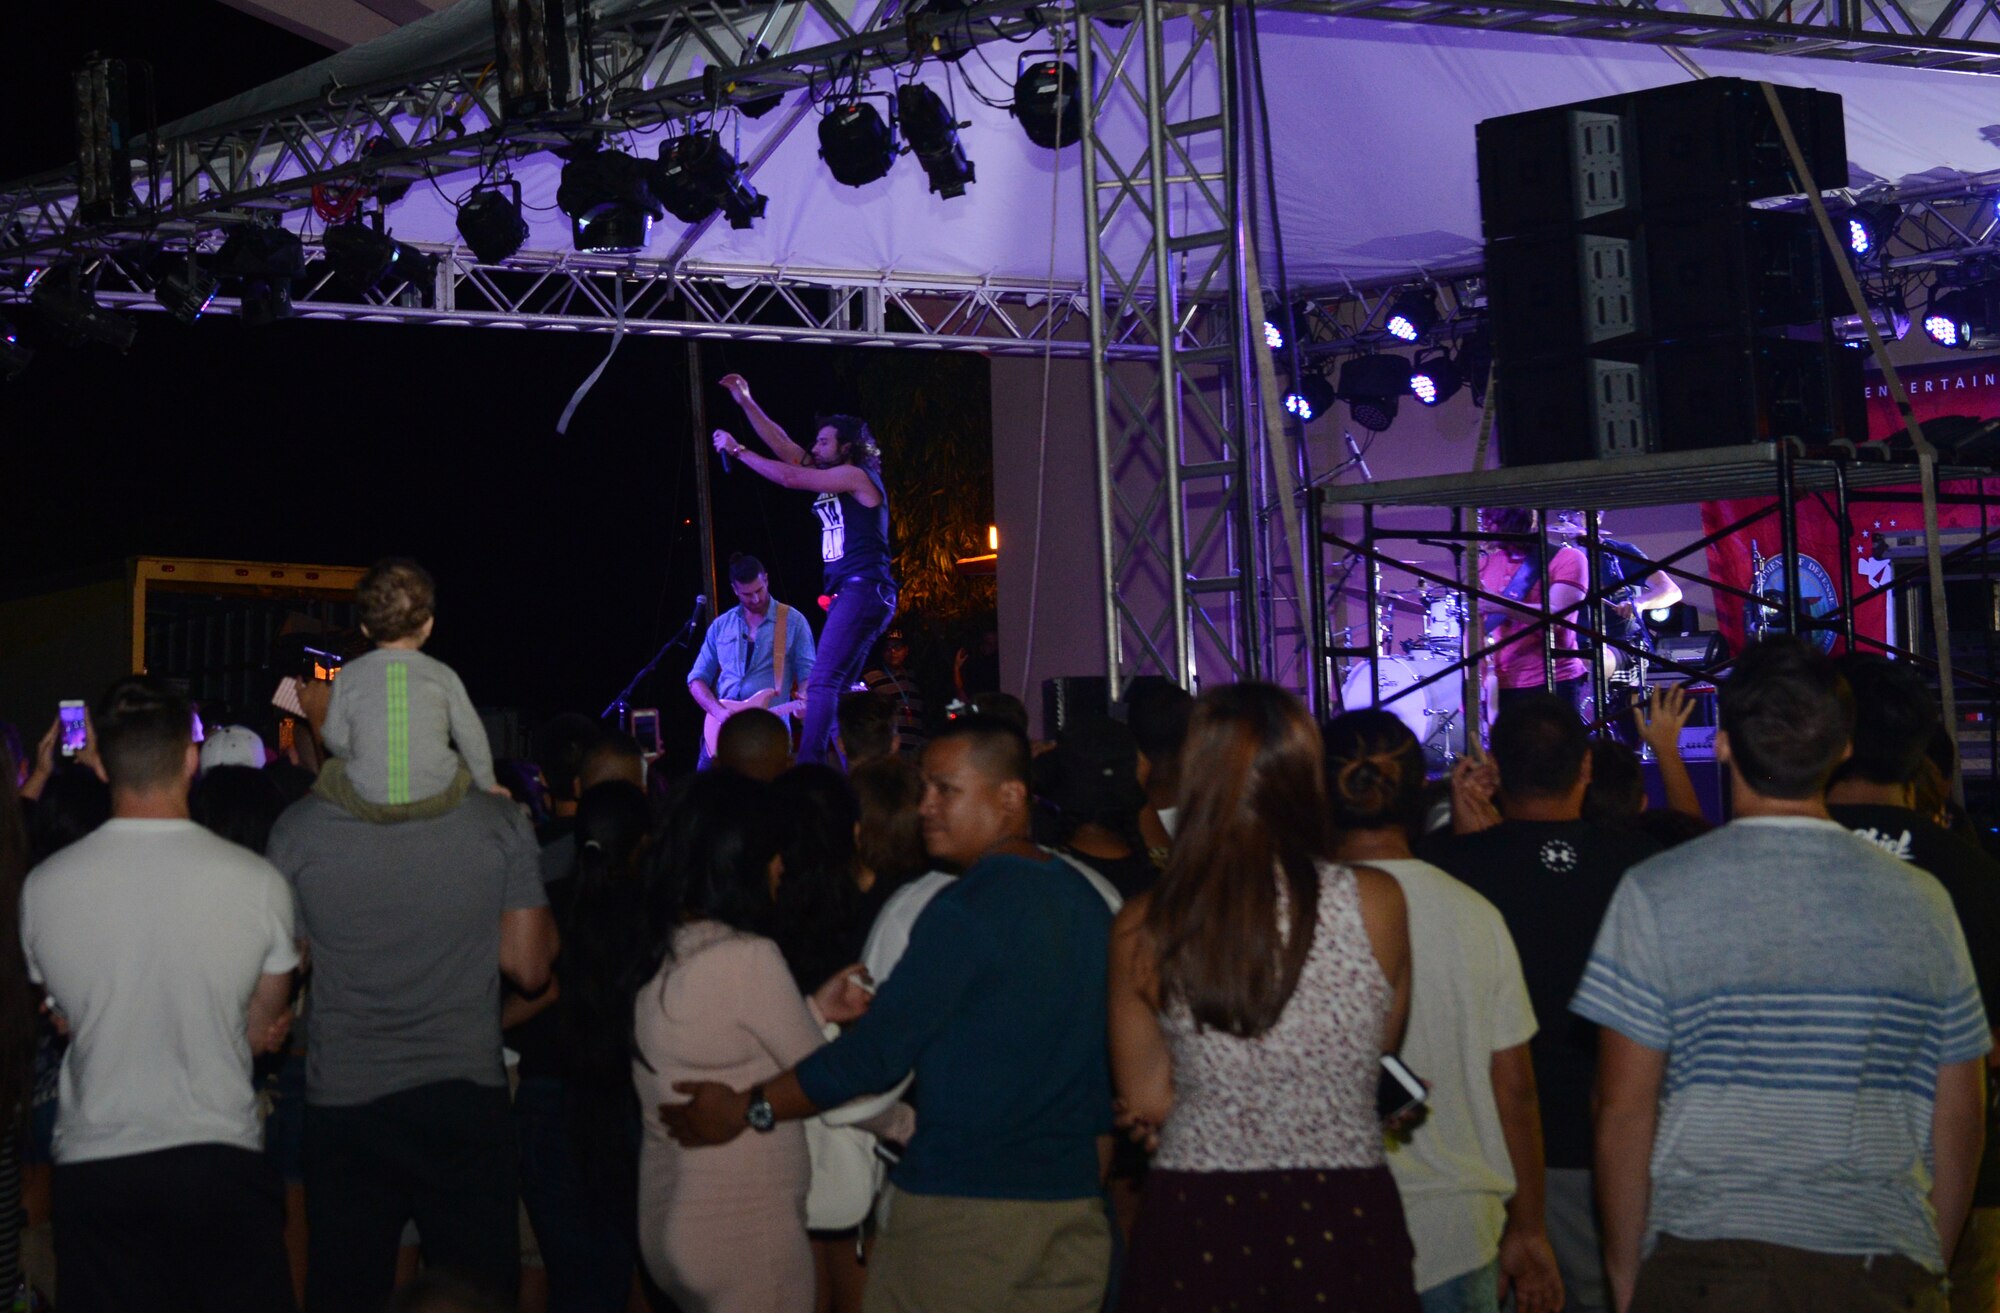 The Canadian reggae fusion band Magic! performs for service members and their families Jan. 14, 2016, at Andersen Air Force Base, Guam. The free event was hosted by the Department of Defense’s Armed Forces Entertainment and drew a crowd of 2,000 people. (U.S. Air Force photo/Airman 1st Class Arielle Vasquez)